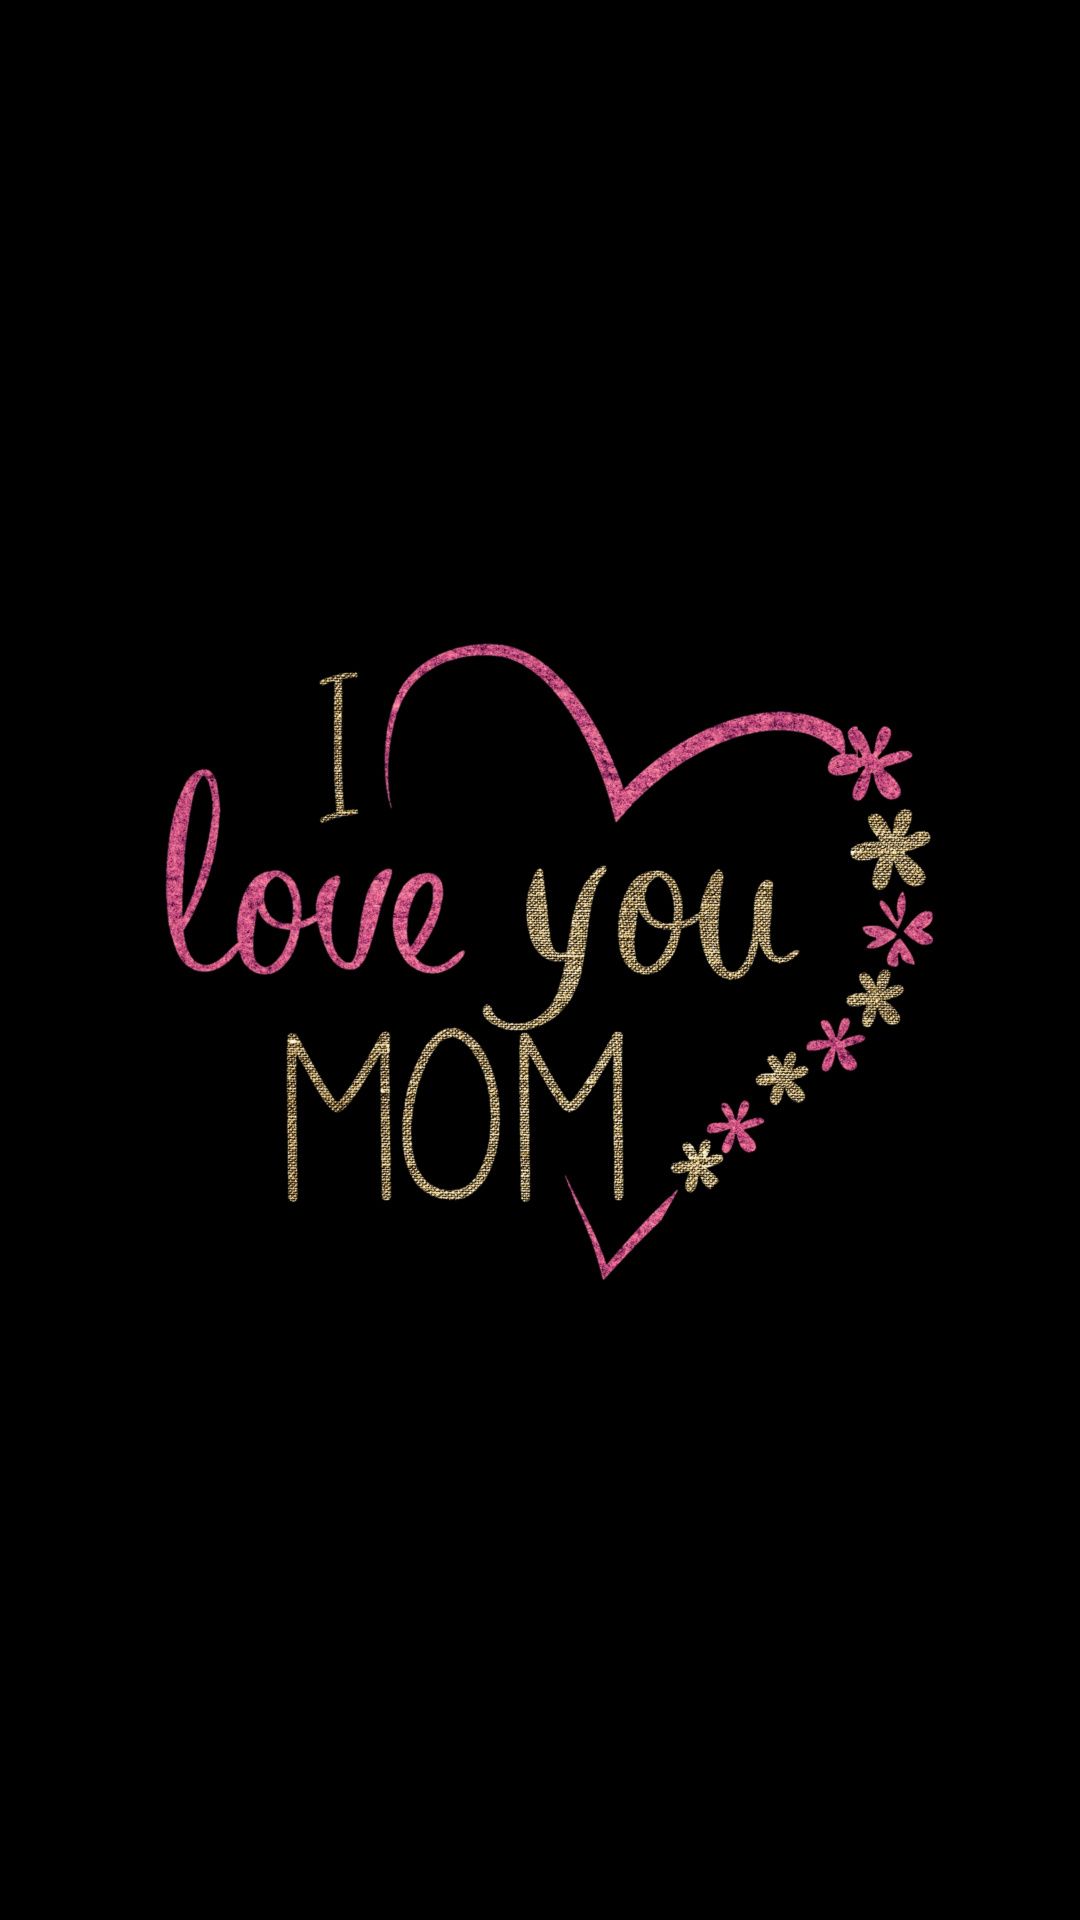 Inscription, typography, mom, minimal, love, heart, 1080x1920 wallpaper. Love you mom quotes, Happy mothers day image, My mom quotes